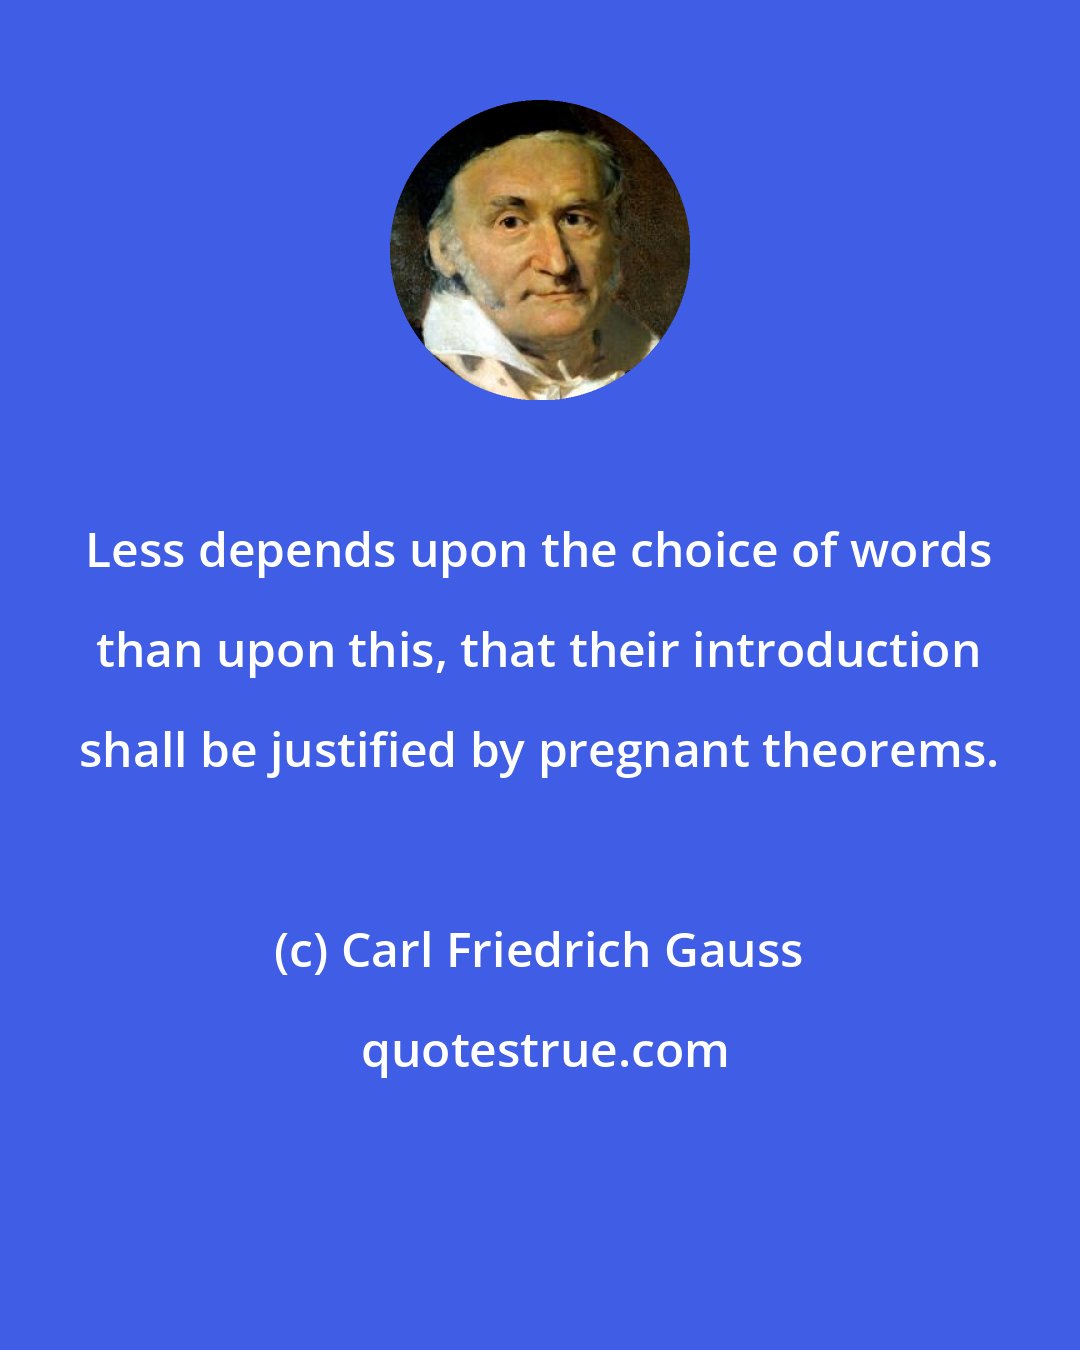 Carl Friedrich Gauss: Less depends upon the choice of words than upon this, that their introduction shall be justified by pregnant theorems.